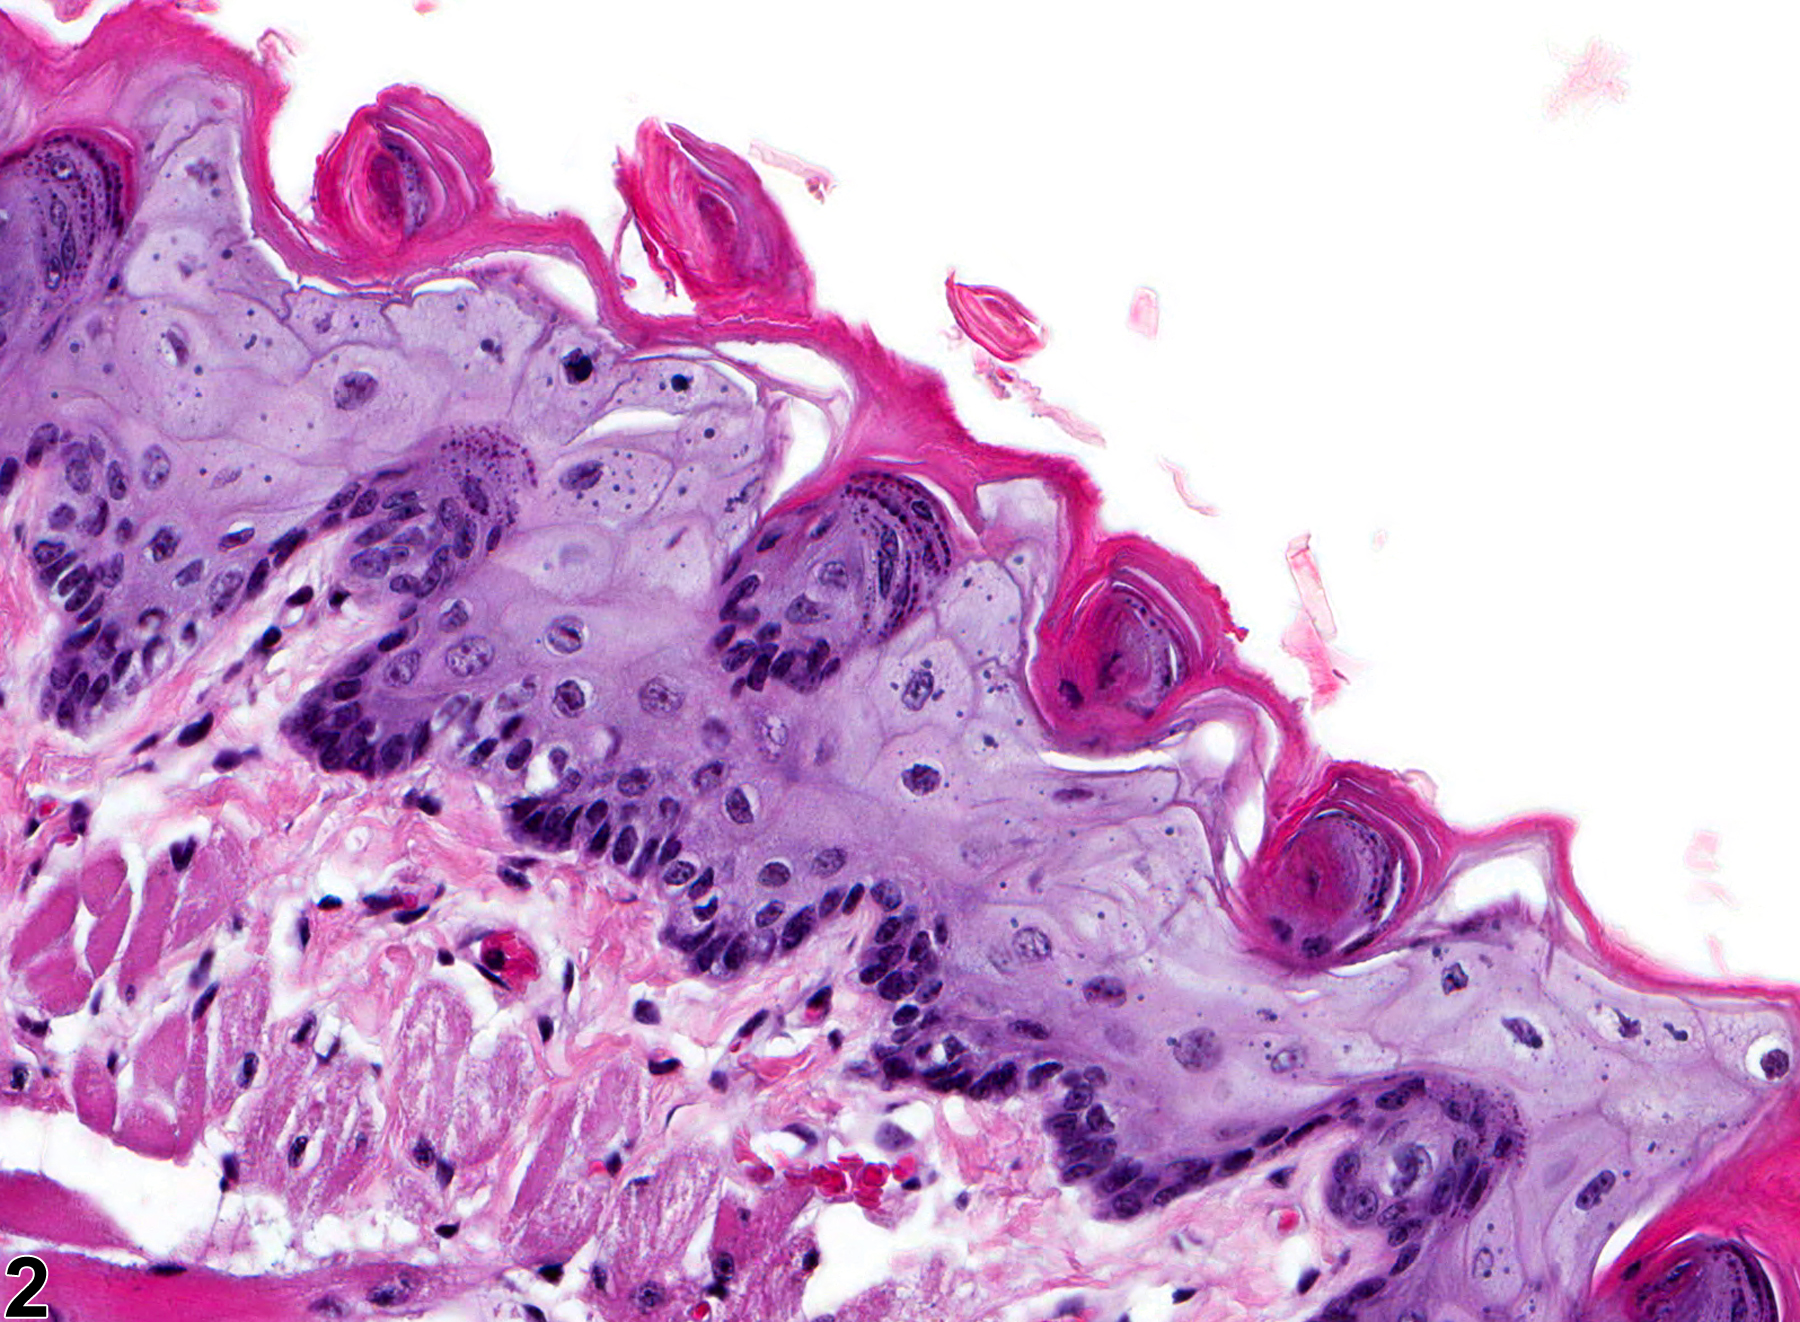 Image of degeneration in the tongue epithelium from a male F344/N rat in a chronic study